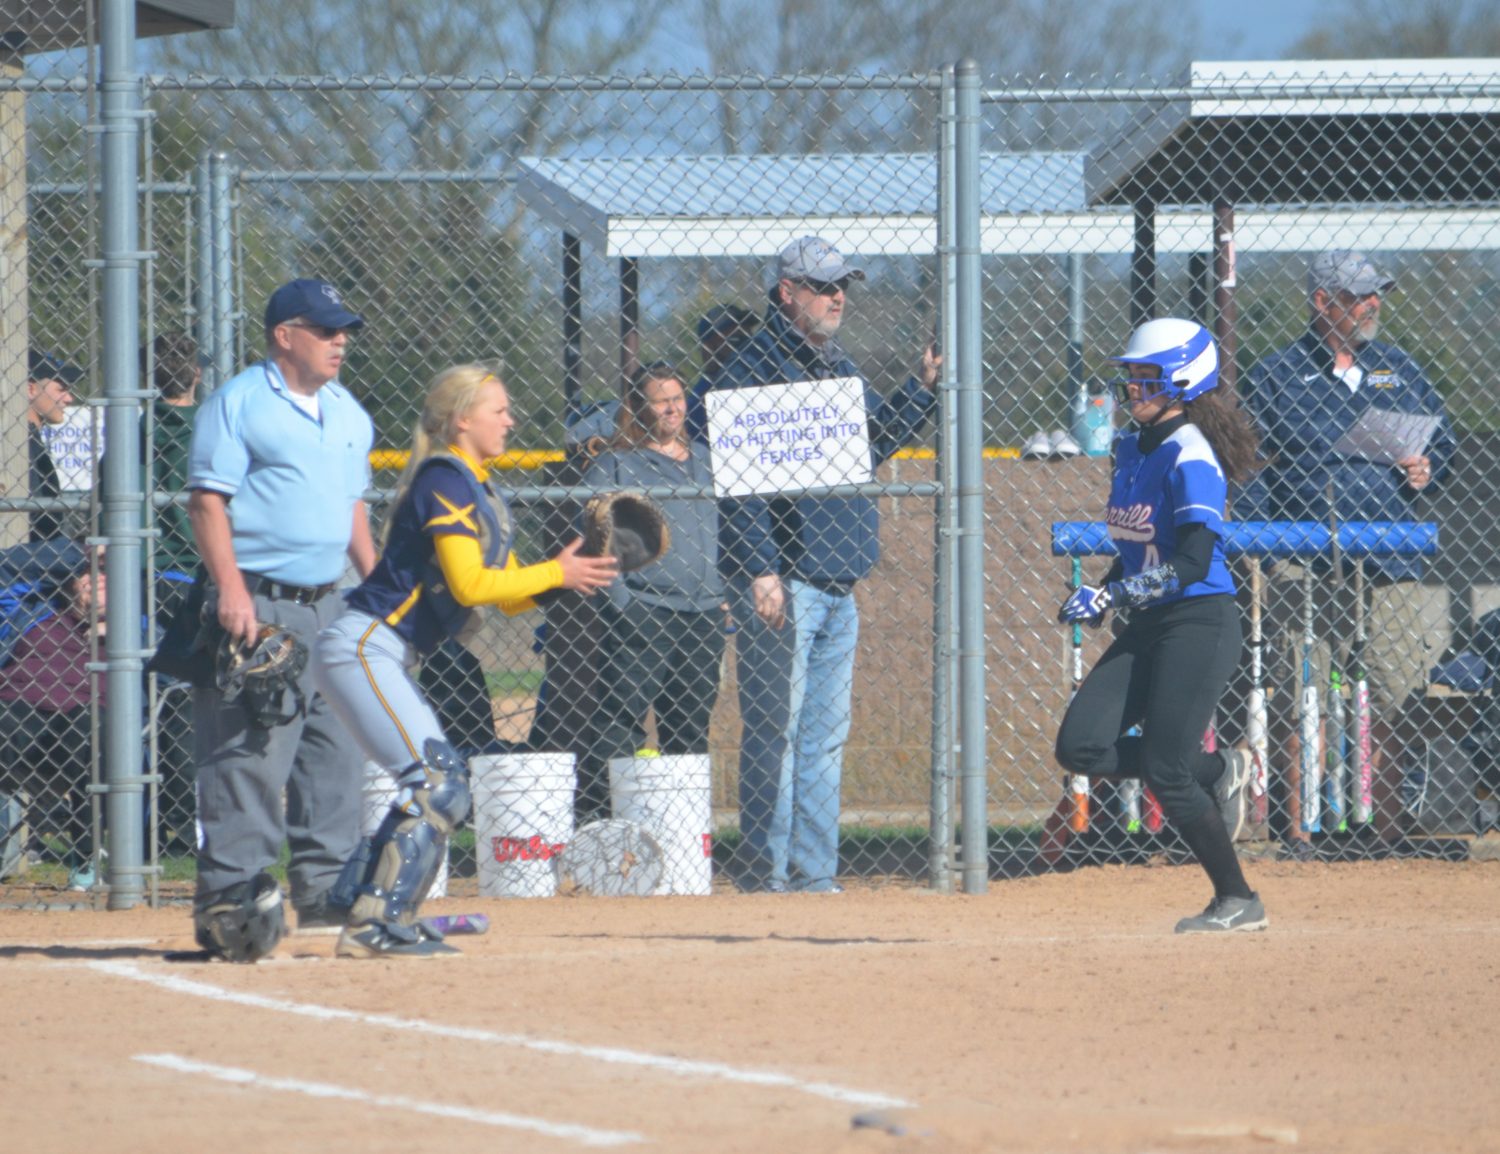 Bluejay fastpitch falls late to SPASH